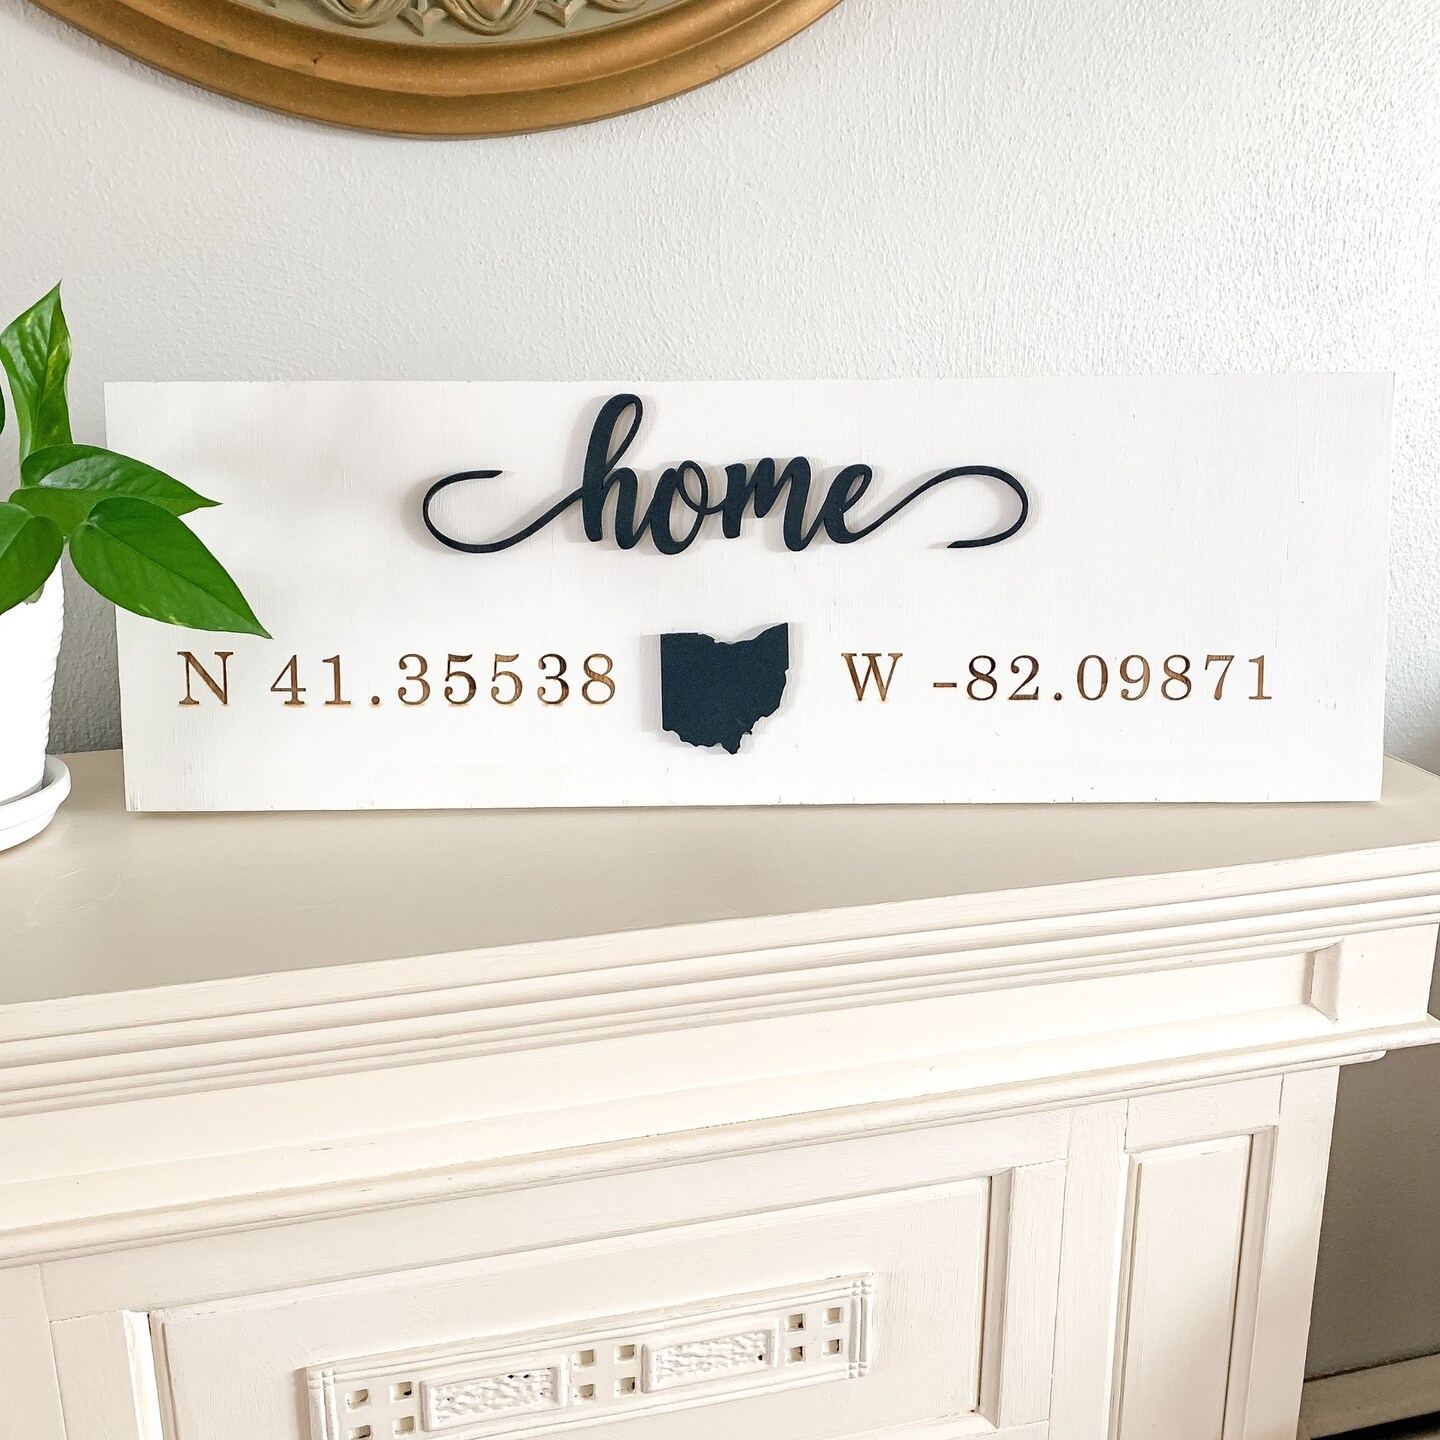 Custom Home Coordinates and State Wood Sign, GPS Coordinates Home Gift,  Housewarming Gift, Personalized Home Sign, Rustic Wood Sign 285990073133760512